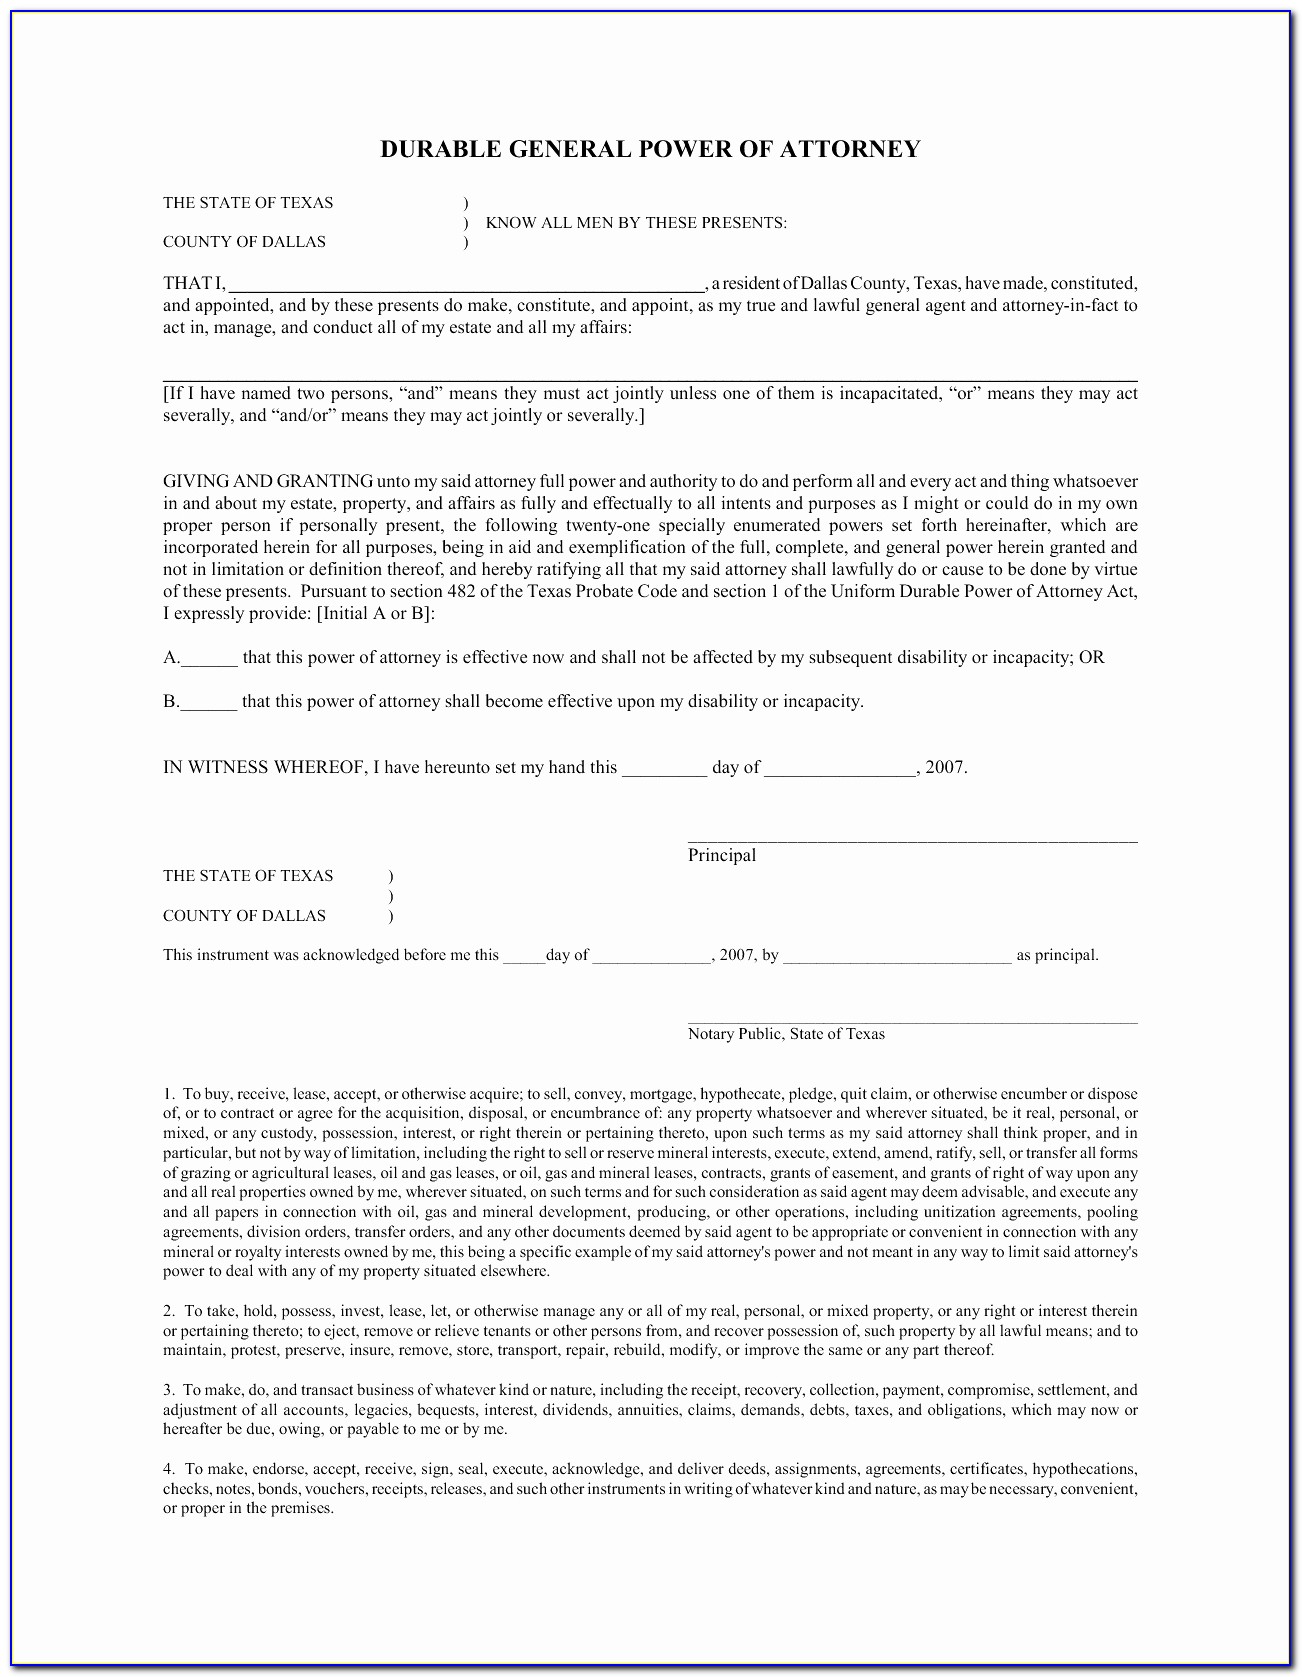 Indiana Durable Power Of Attorney Form Pdf Unique Medical Power Attorney Oregon Beautiful Medical Power Attorneygon